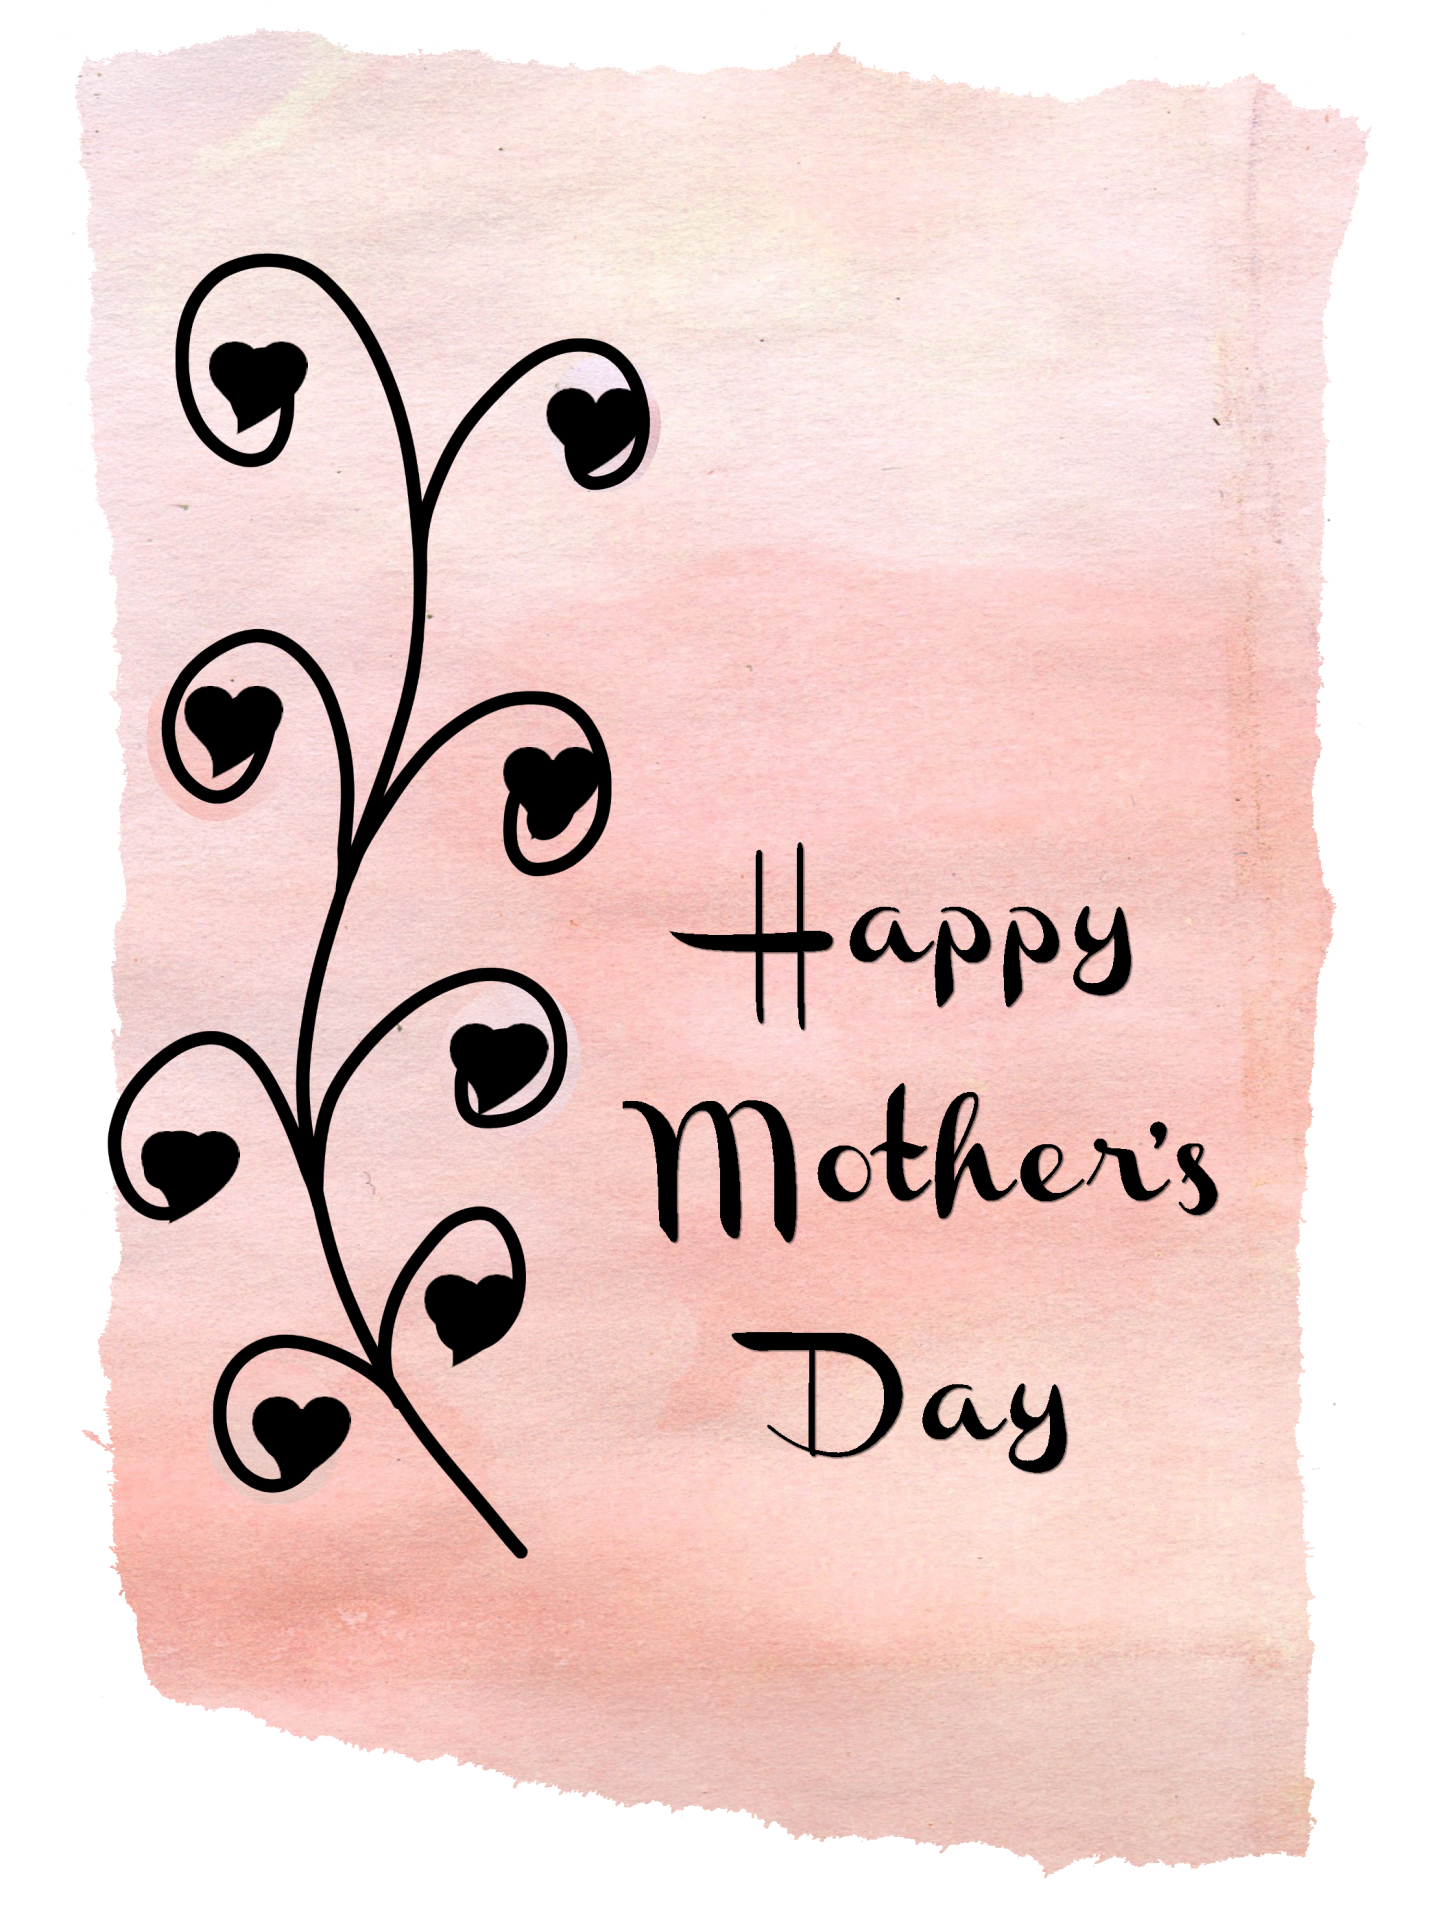 Happy Mother's Day 2020 6 Free Stock Photo Public Domain Pictures